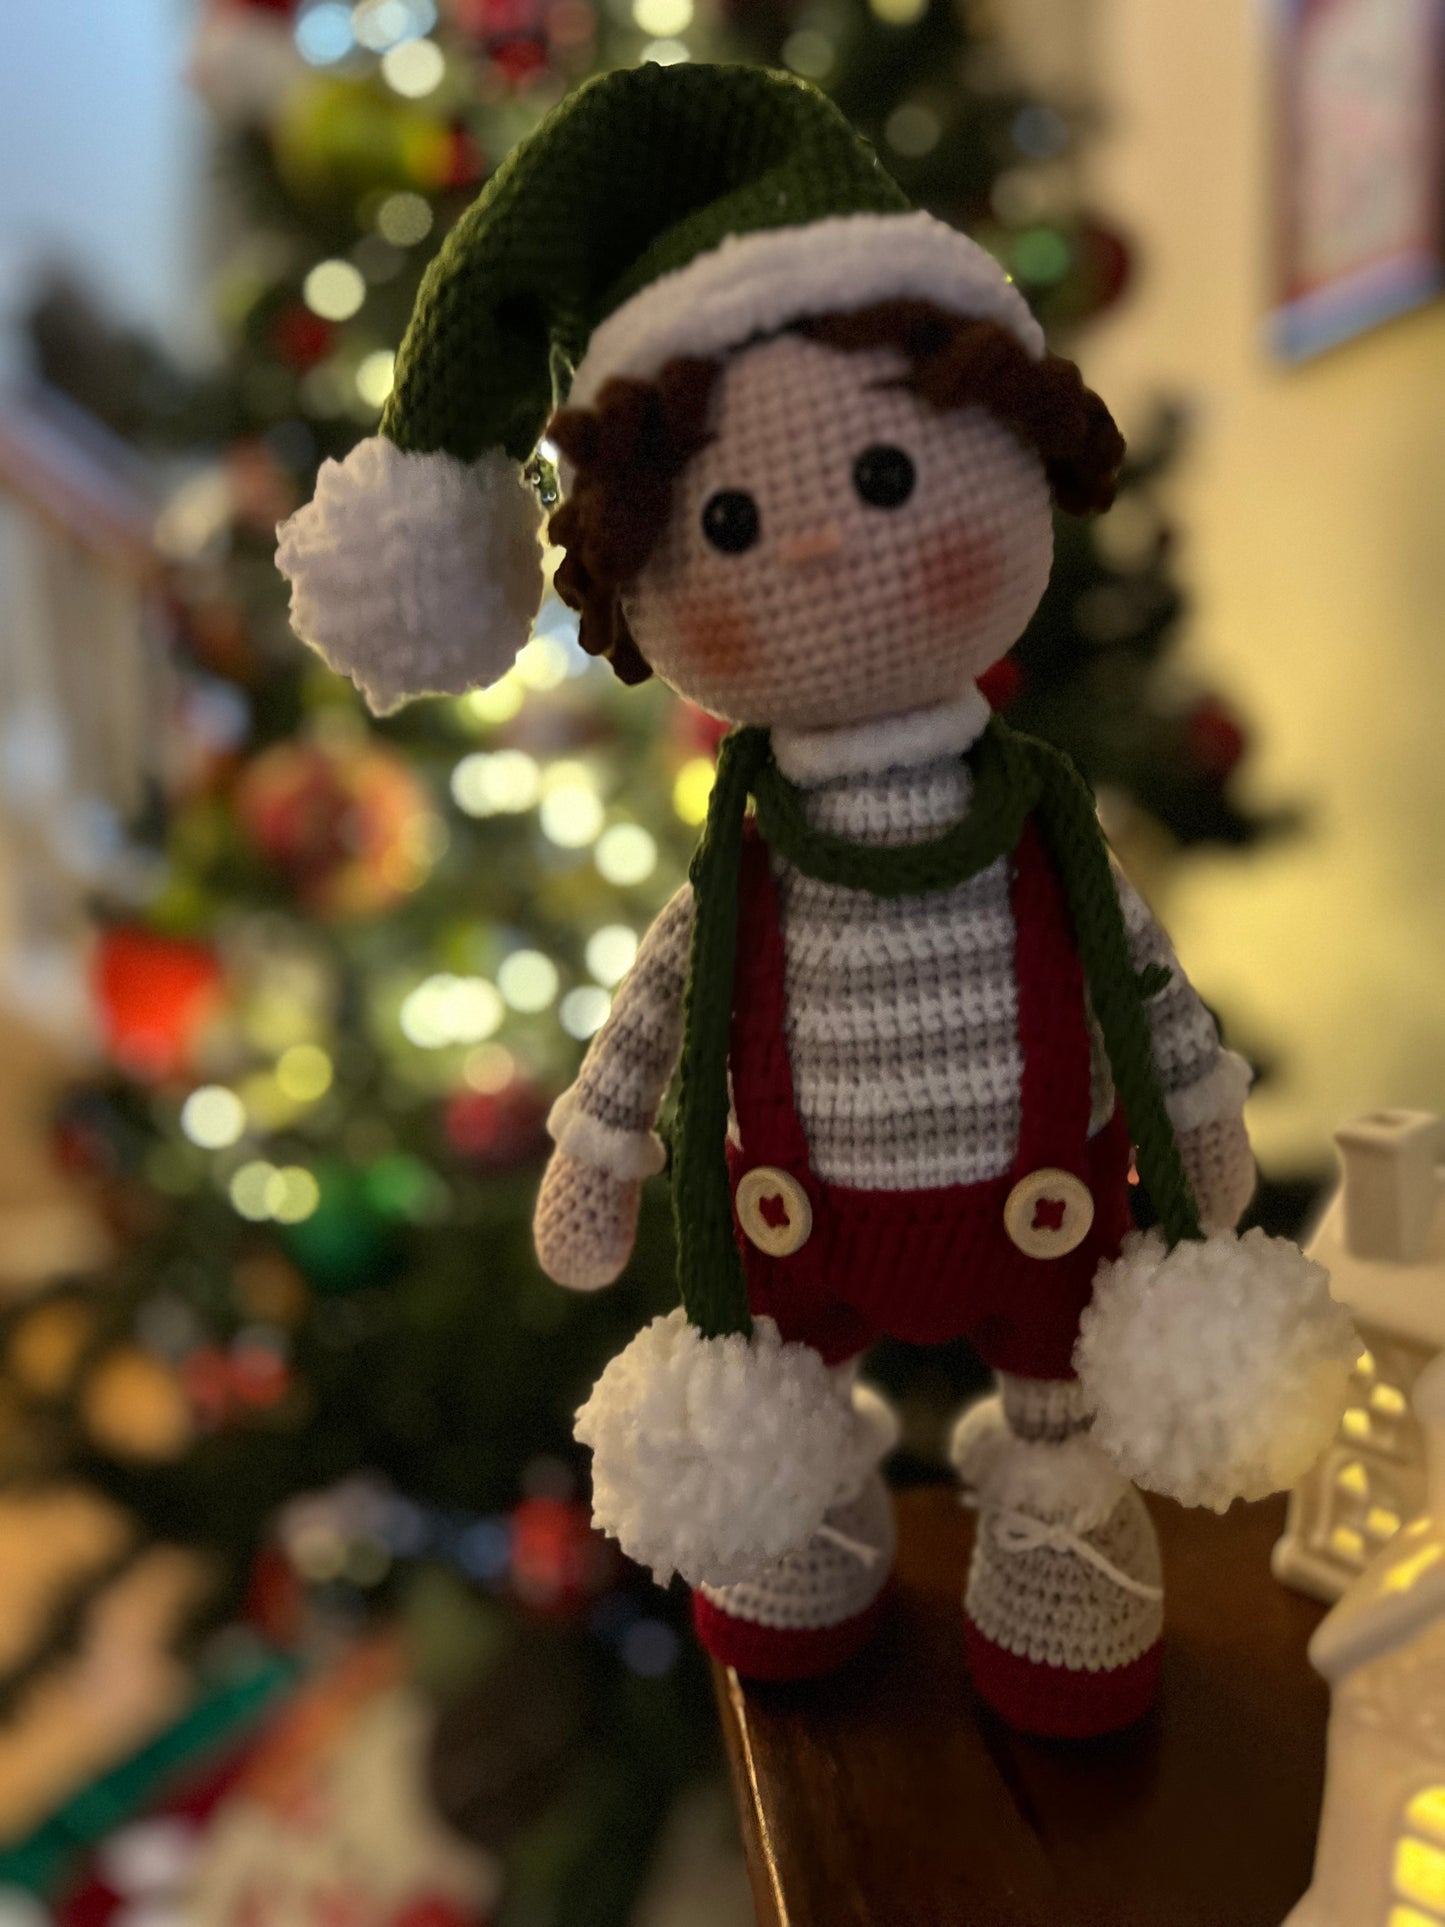 Little Boy Christmas Decoration, Crochet Doll,   Handmade Knitted Christmas Decoration, Amigurumi, Ready Made,  Unique Plush Doll, Collectible Handmade Plushies